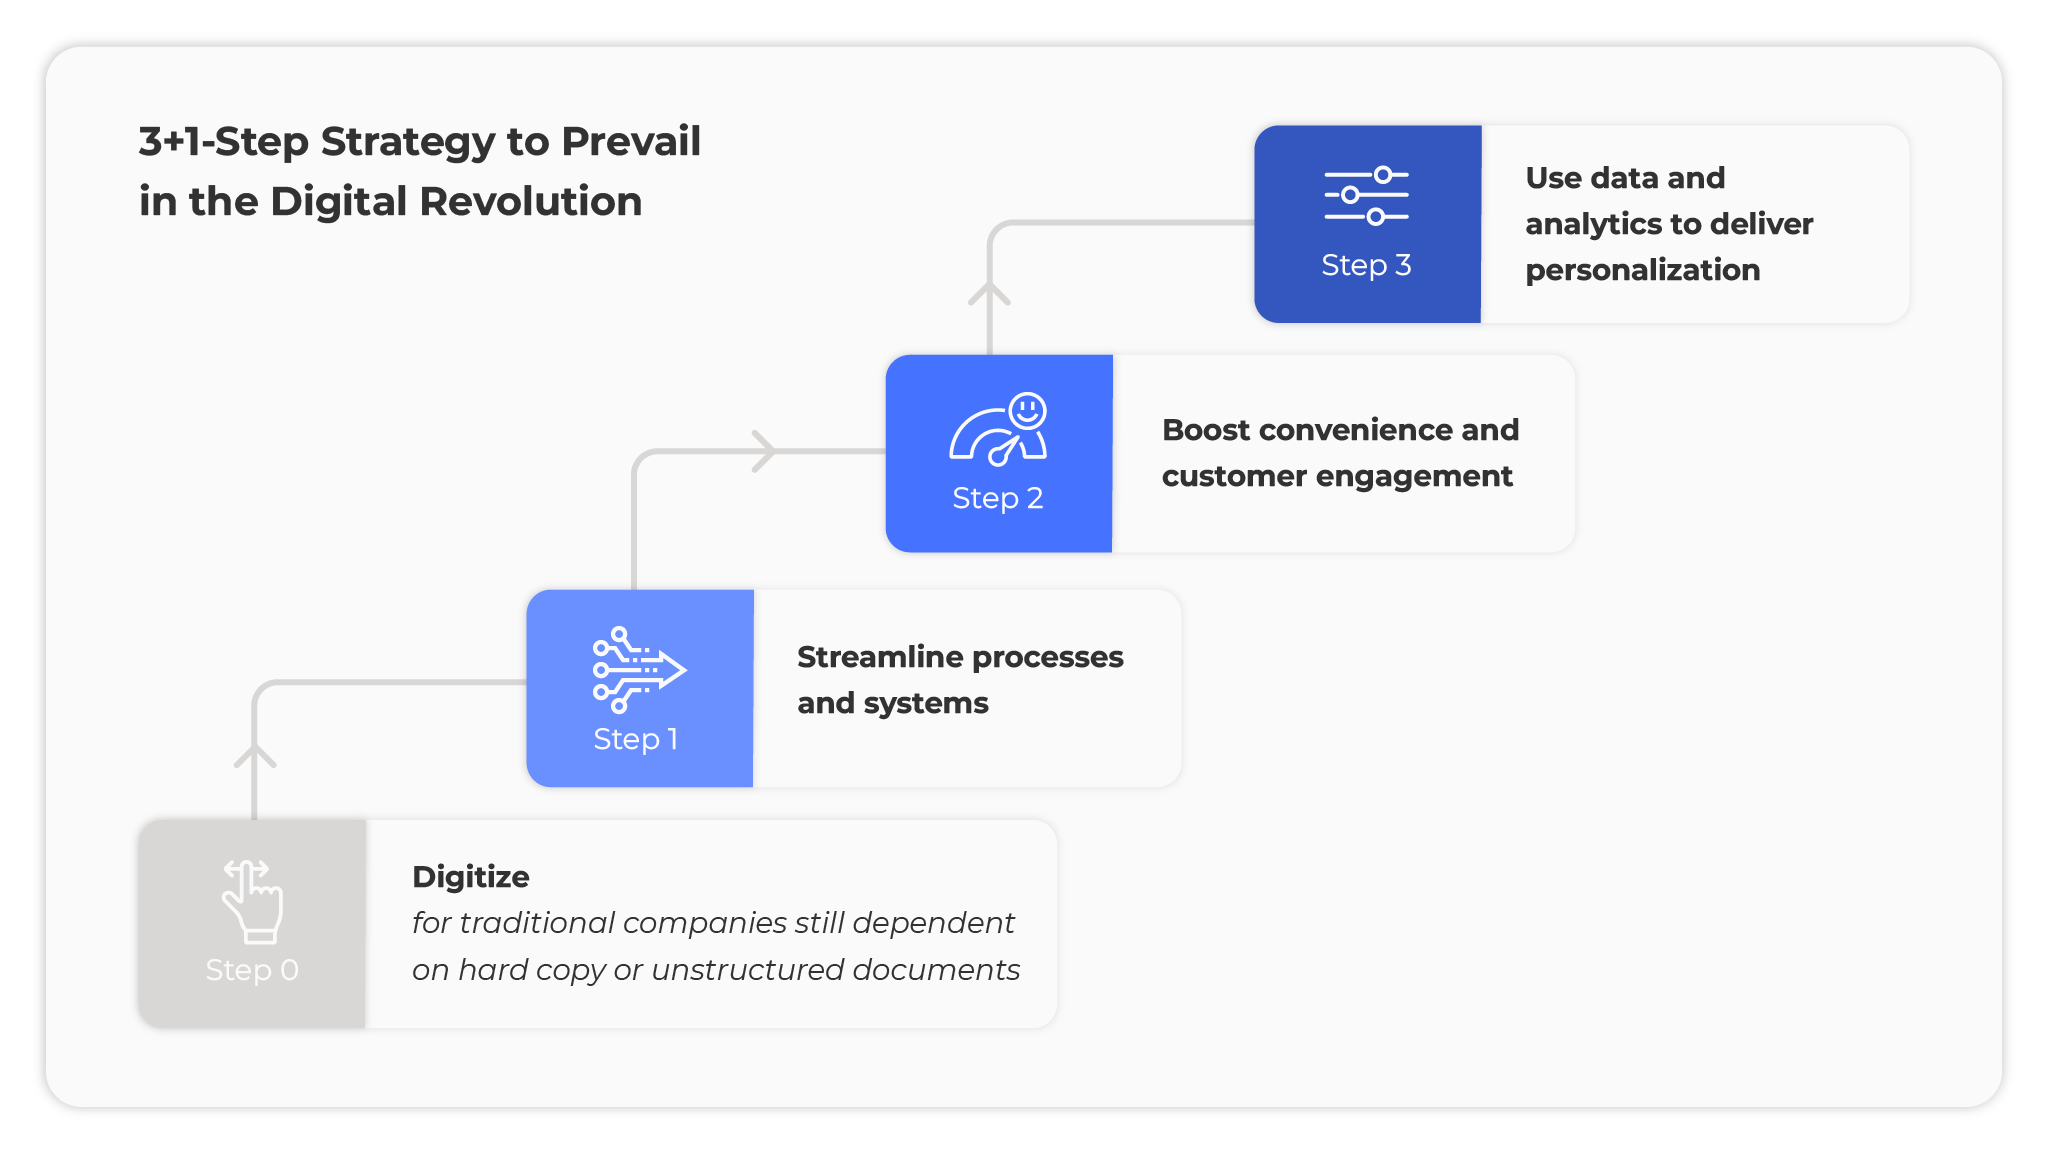 3+1-Step to prevail in the digital revolution